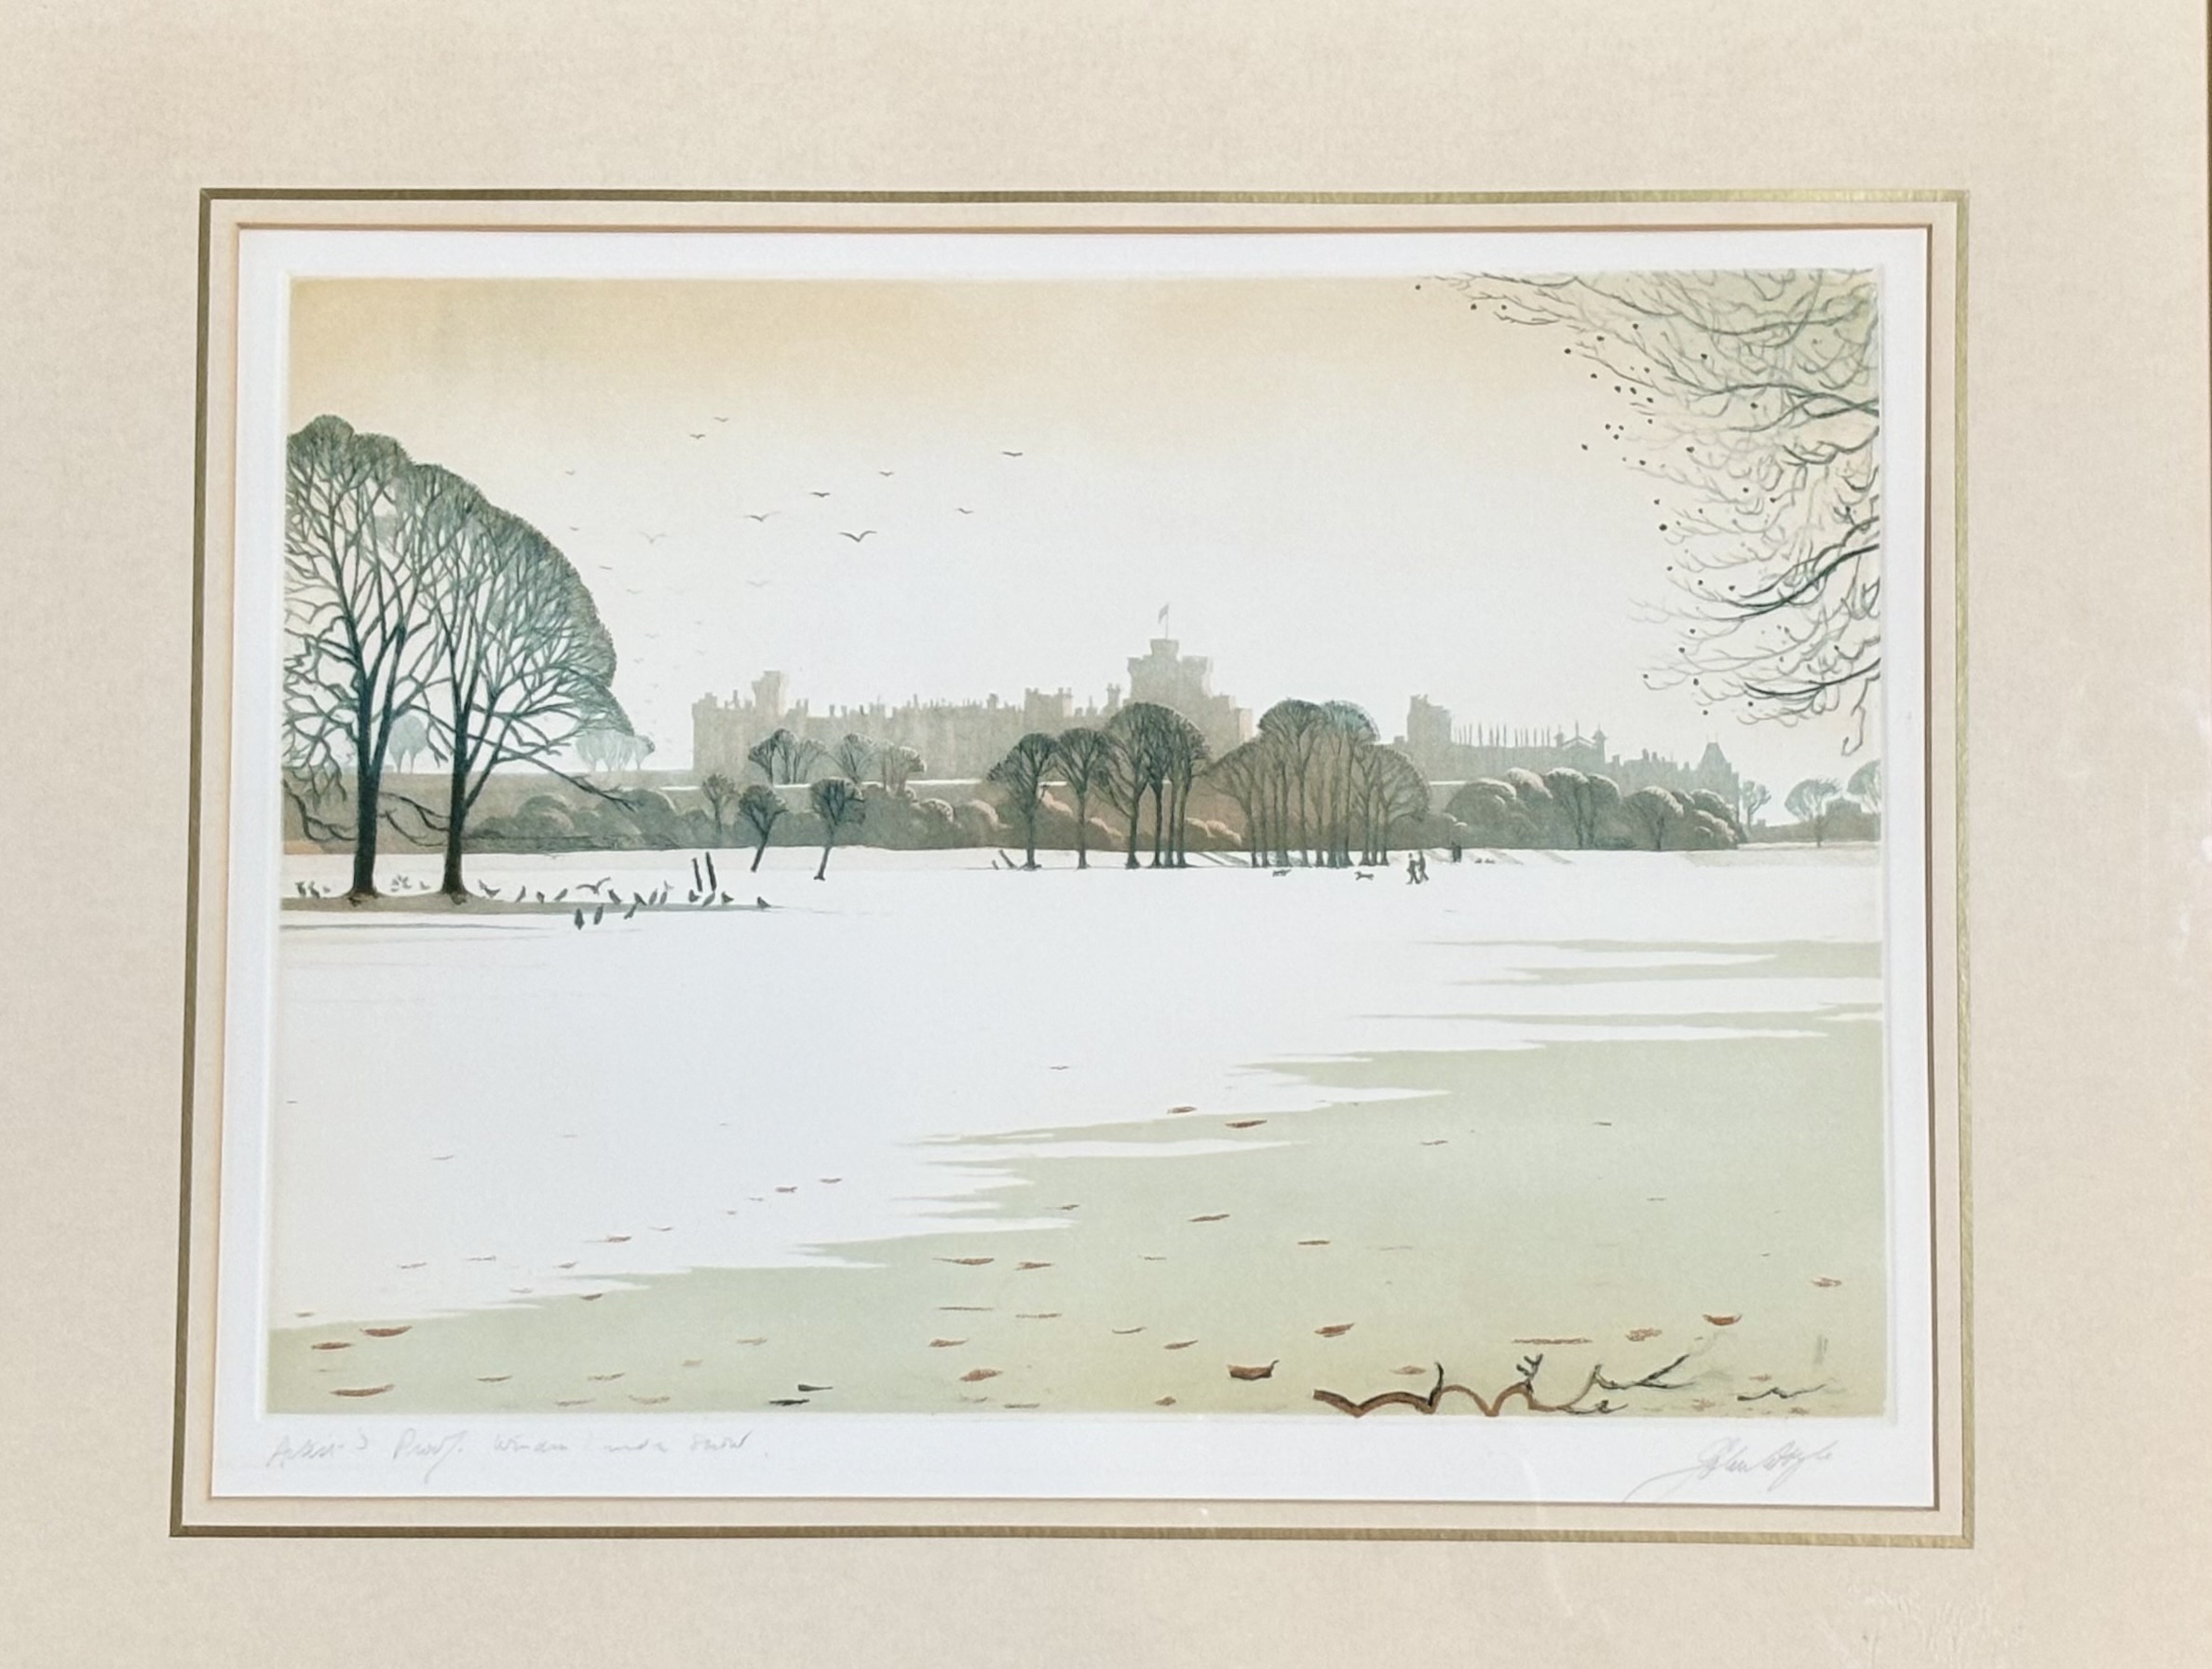 John Doyle (1928-?), Windsor in the Snow, etching, titled and signed pencil bottom right, in a